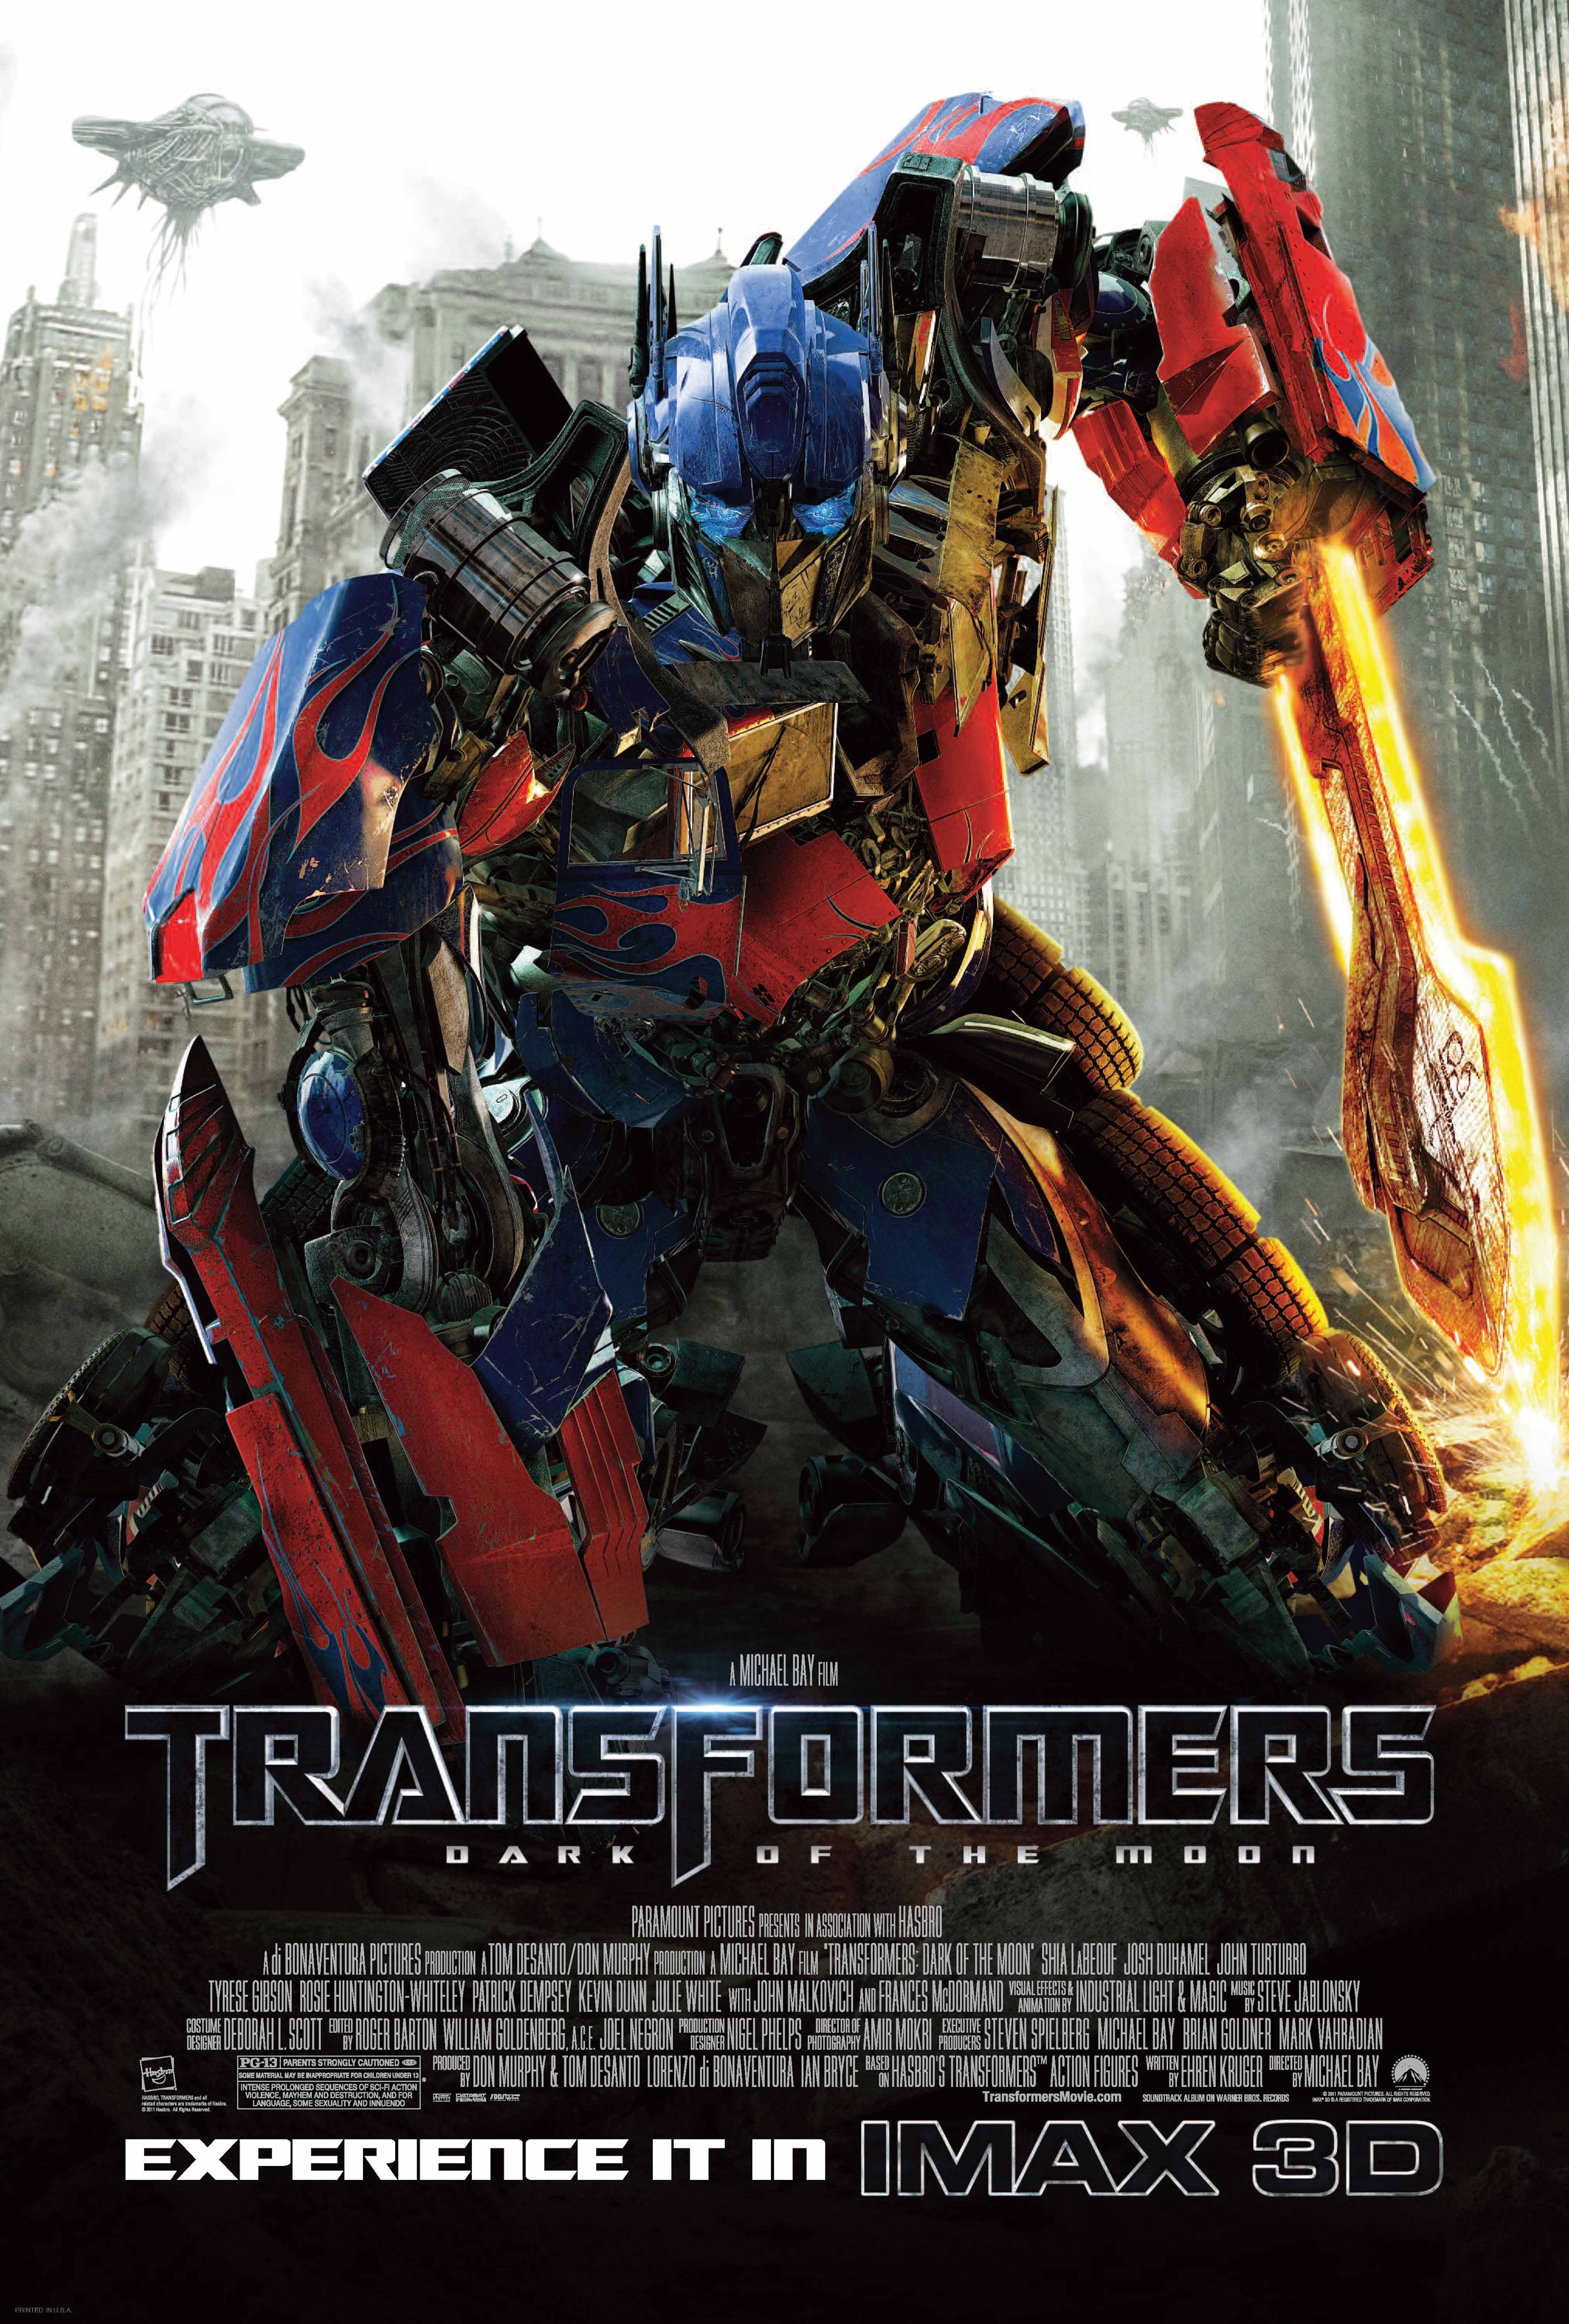 Transformers 3 Transformers Dark of the Moon IMAX Poster One-Sheet